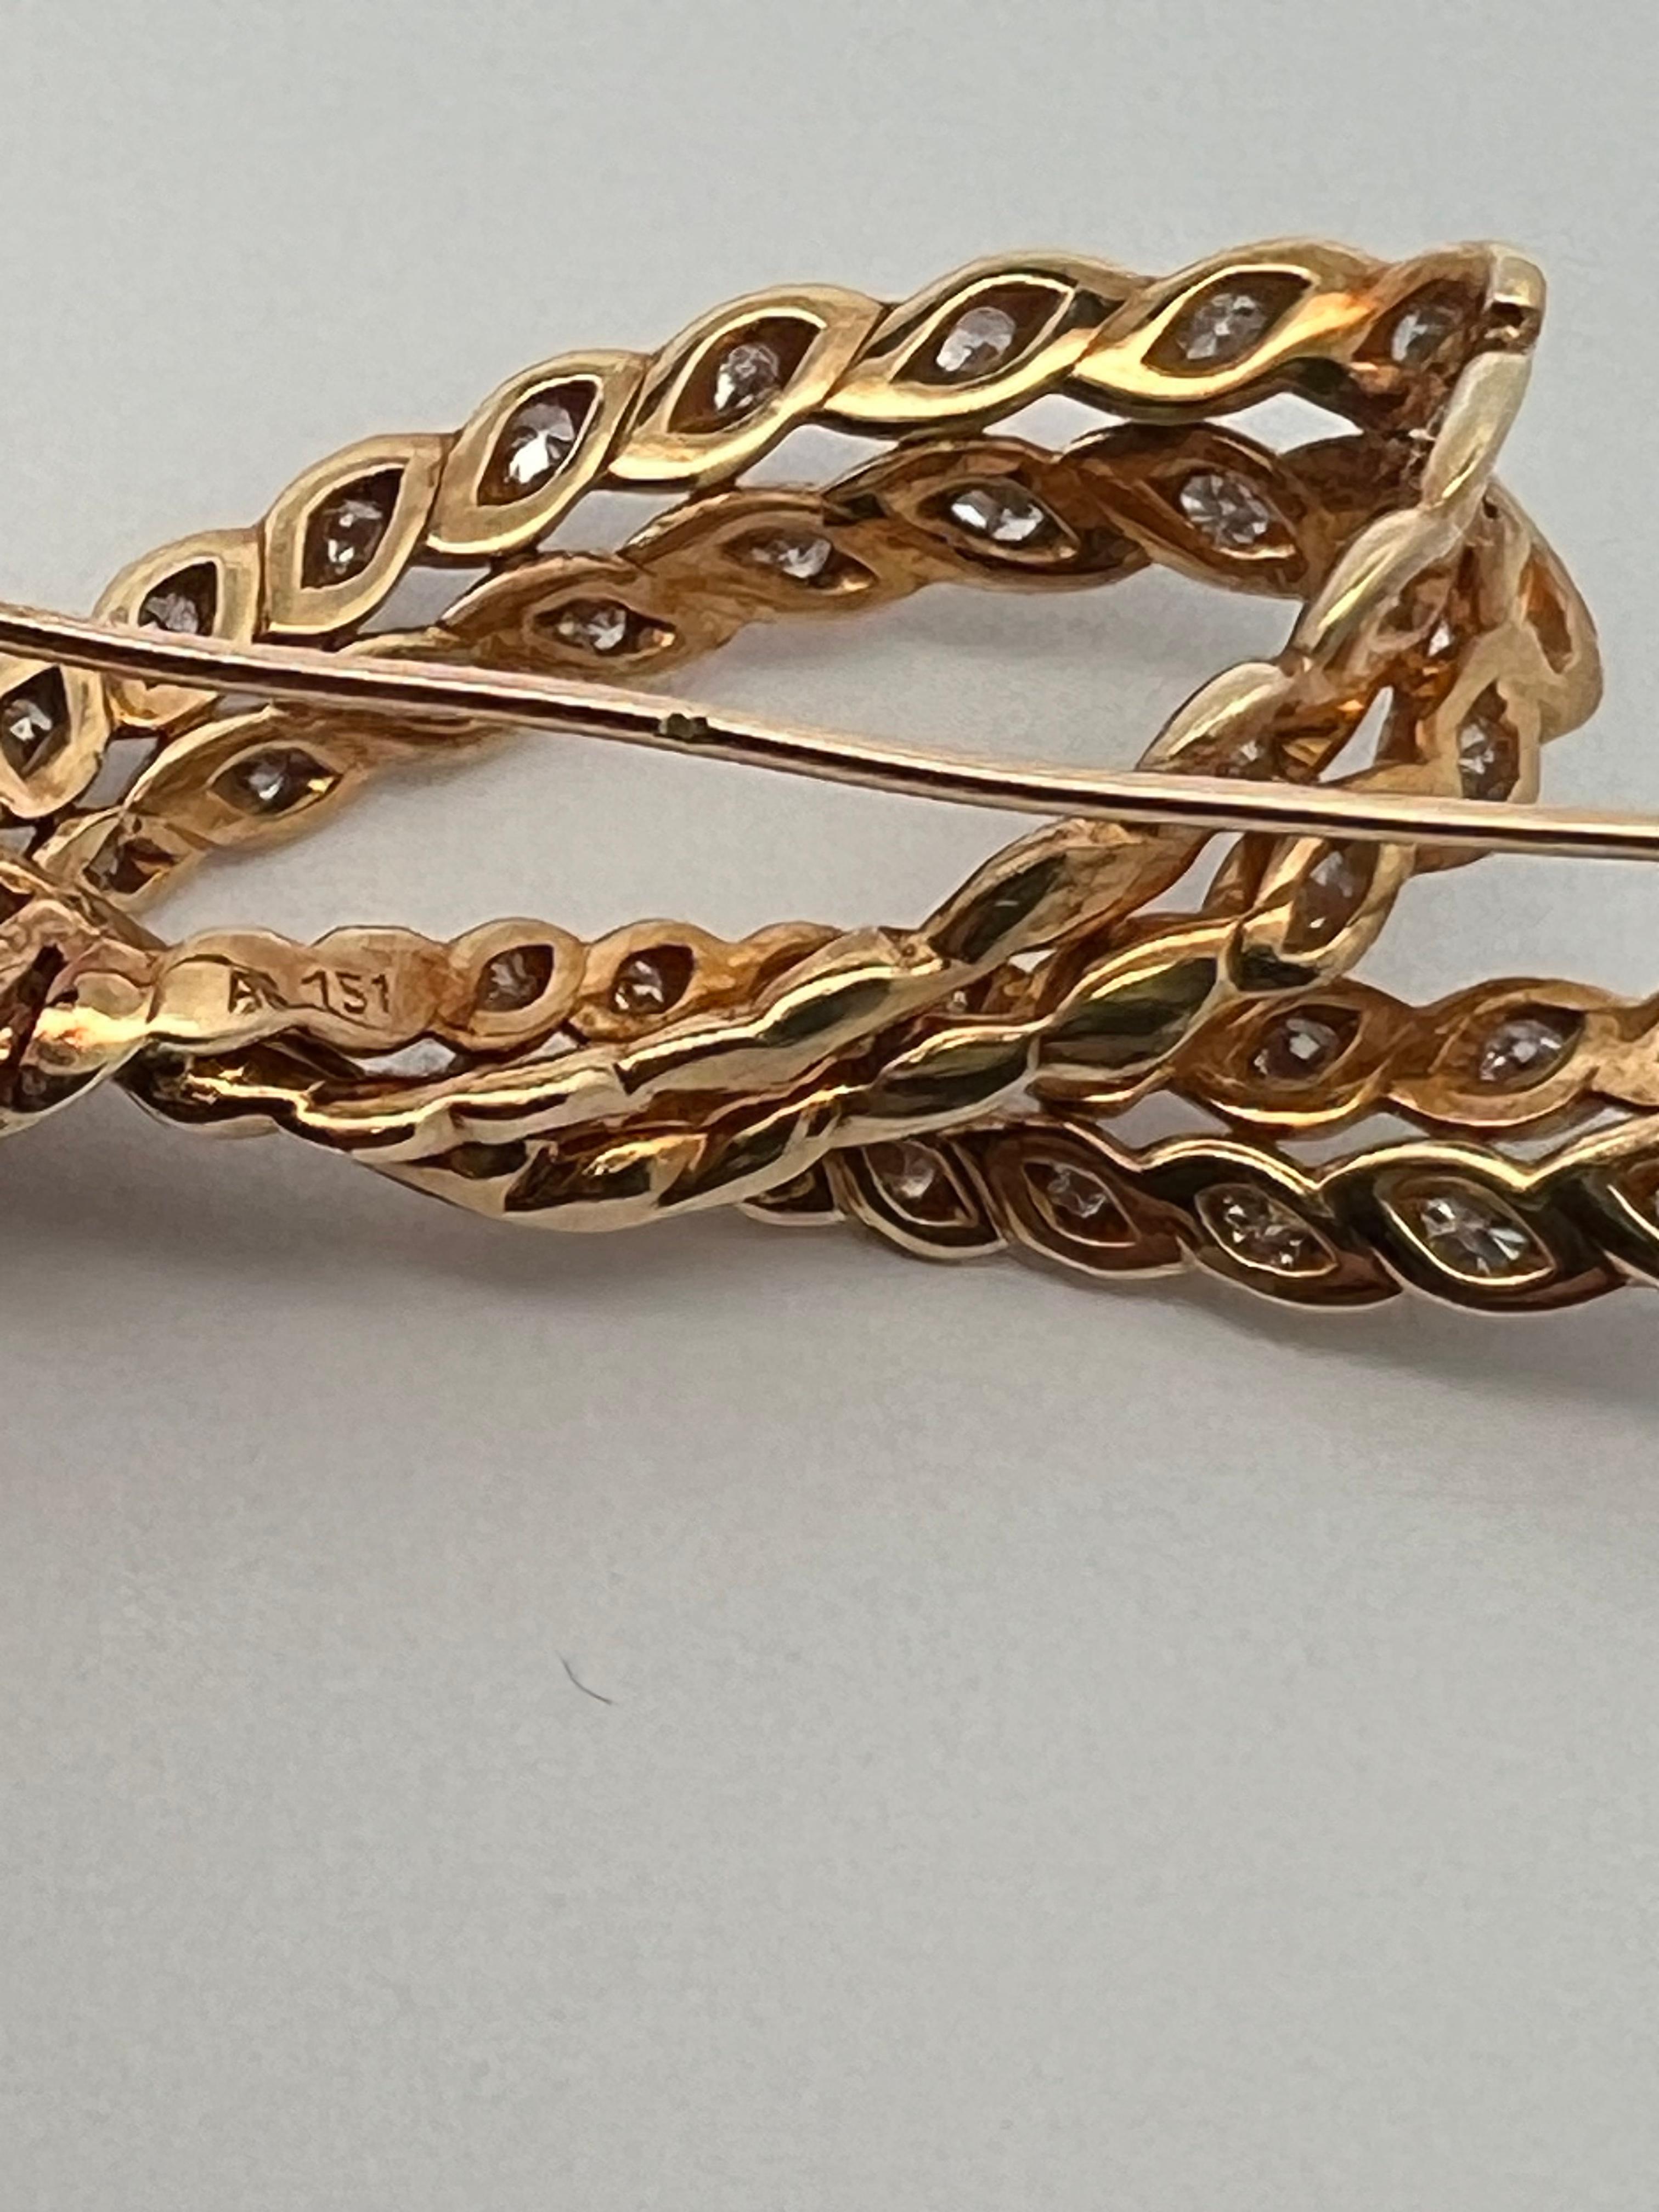 An 18k yellow gold and Diamond brooch by Sterlé 1